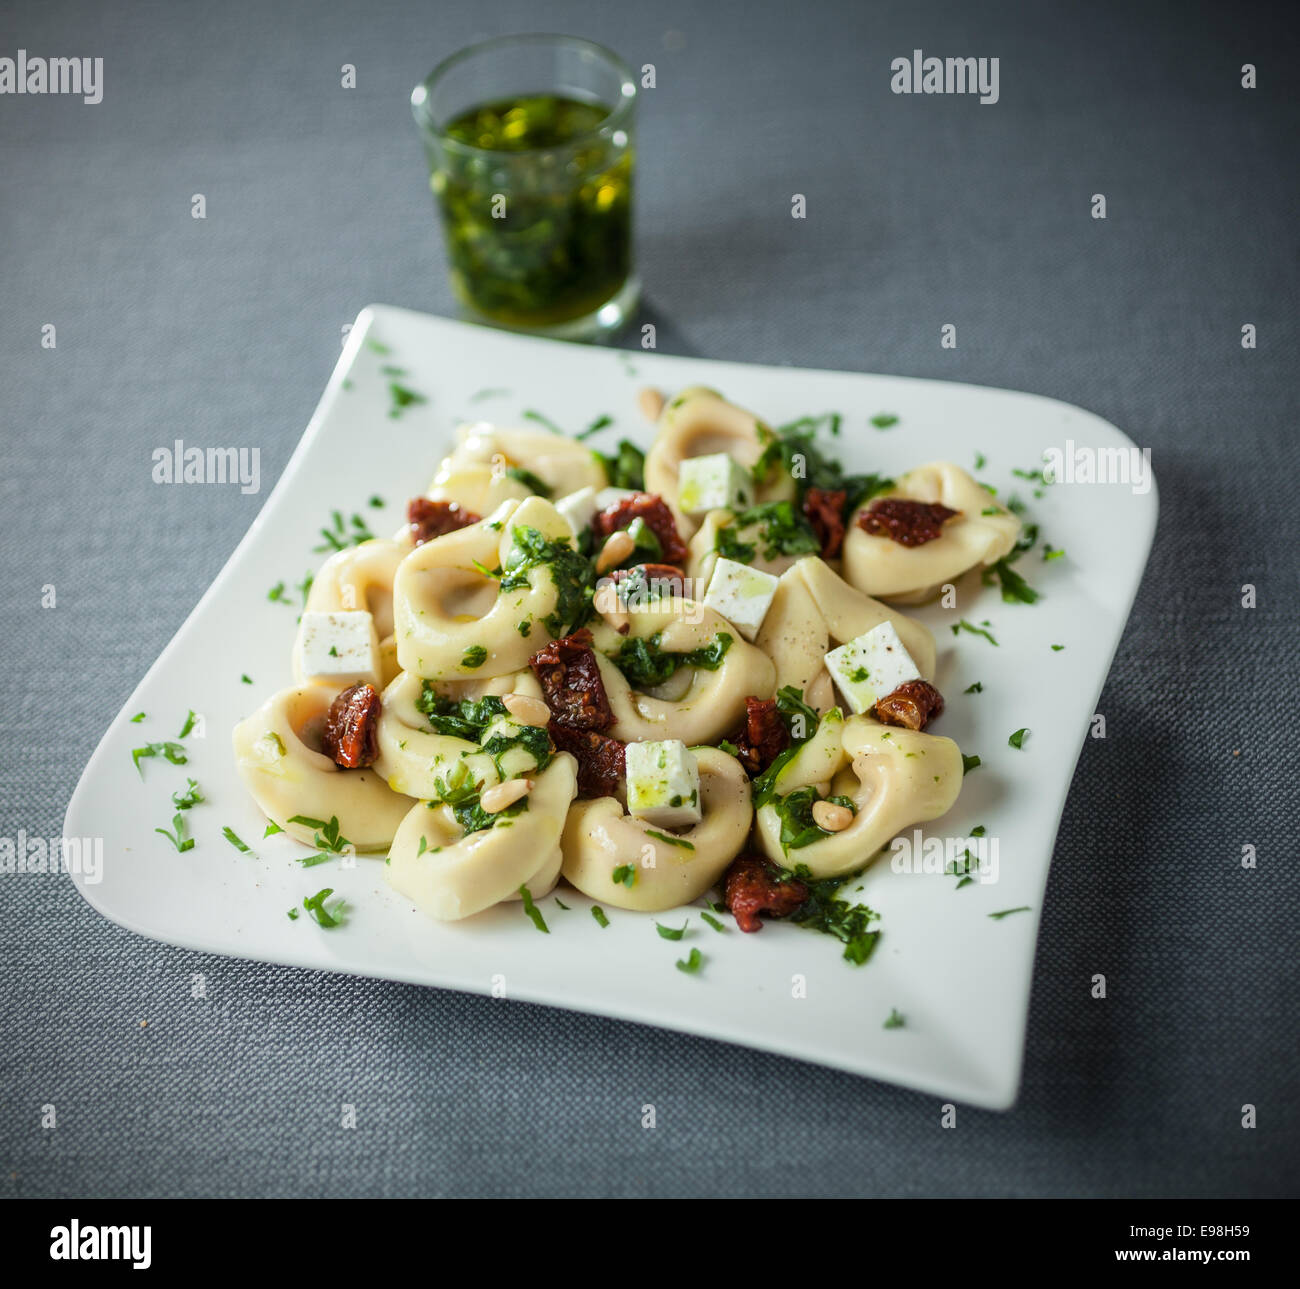 Italian tortellini pasta with feta cheese and basil and pine nut pesto drizzled with virgin olive oil on a modern stylish plate Stock Photo